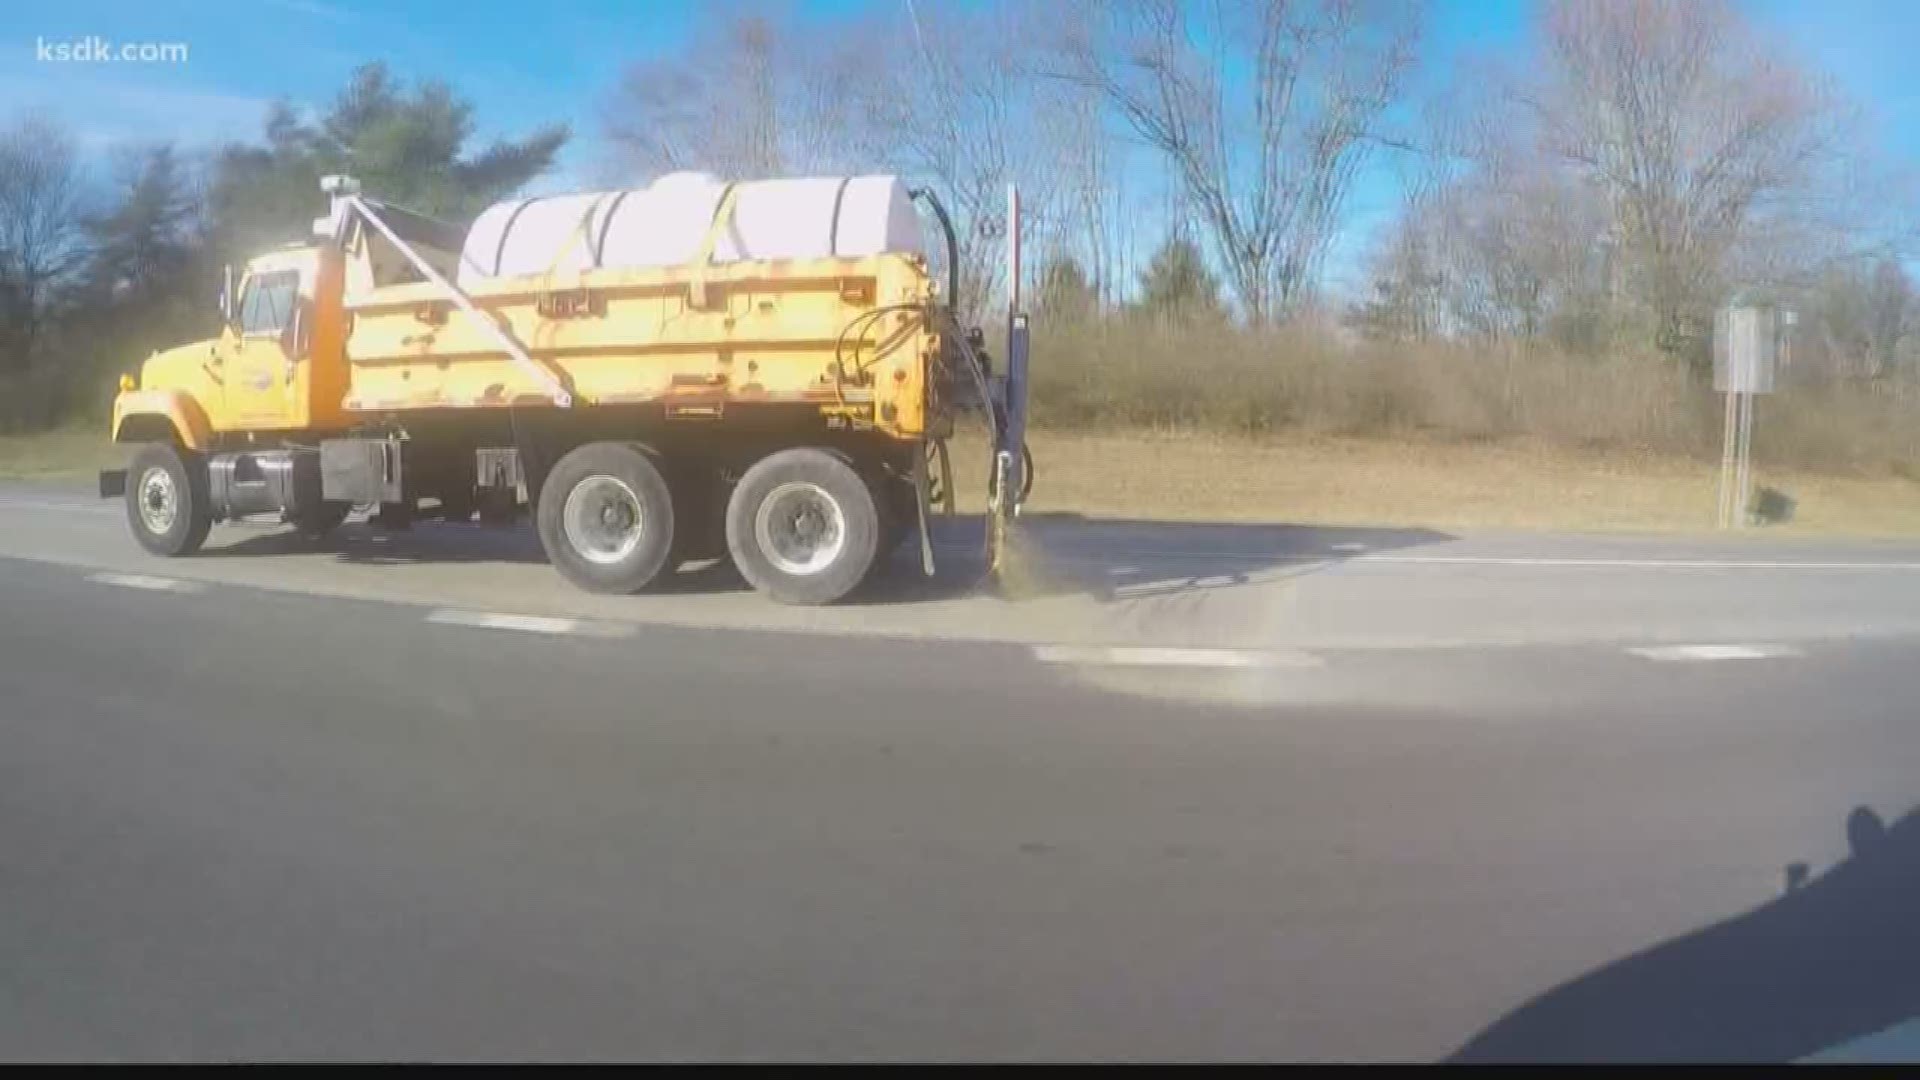 If you've driven on area roads in the last two days, you might have seen MoDOT trucks spraying liquid on the roadways.